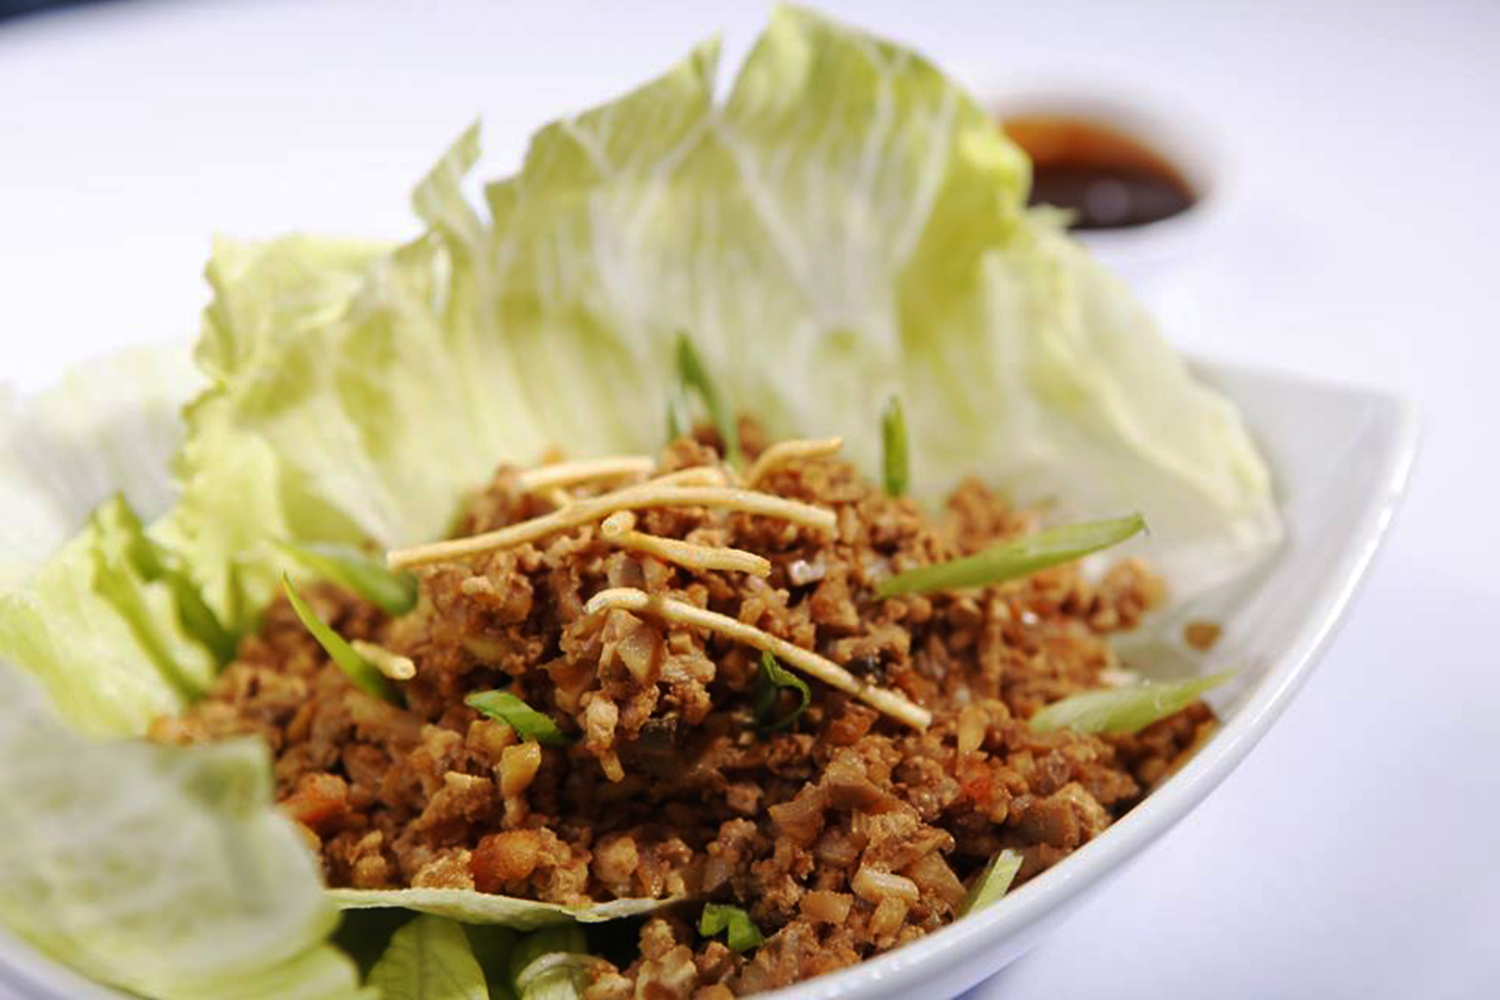 lettuce cup at asian restaurant